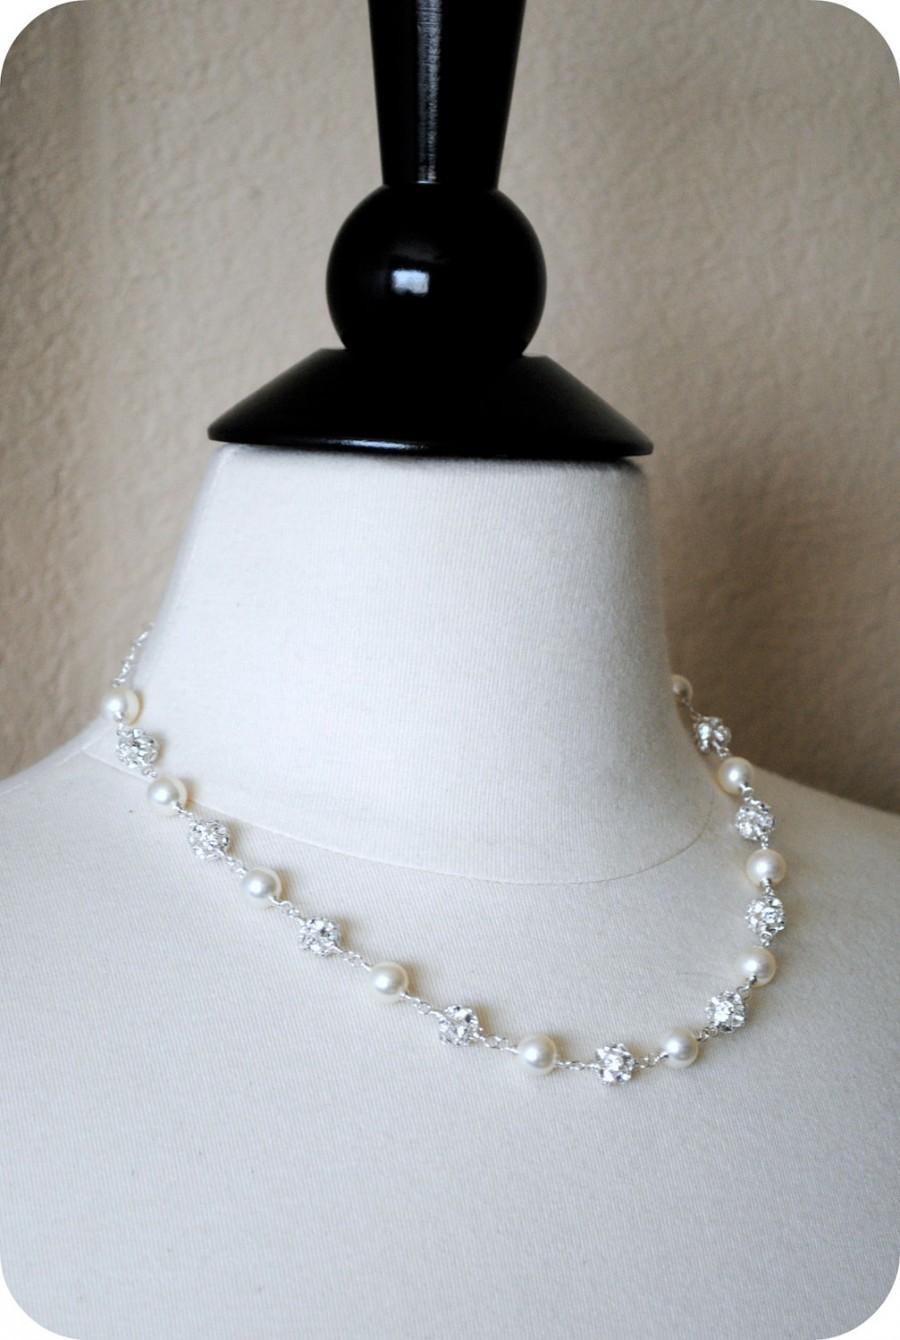 Wedding - Pearl Necklace, Bridal Rhinestone Necklace, Elegant Wedding Necklace, Couture Necklace, Long, Layered, Ivory, White, Wire Wrapped